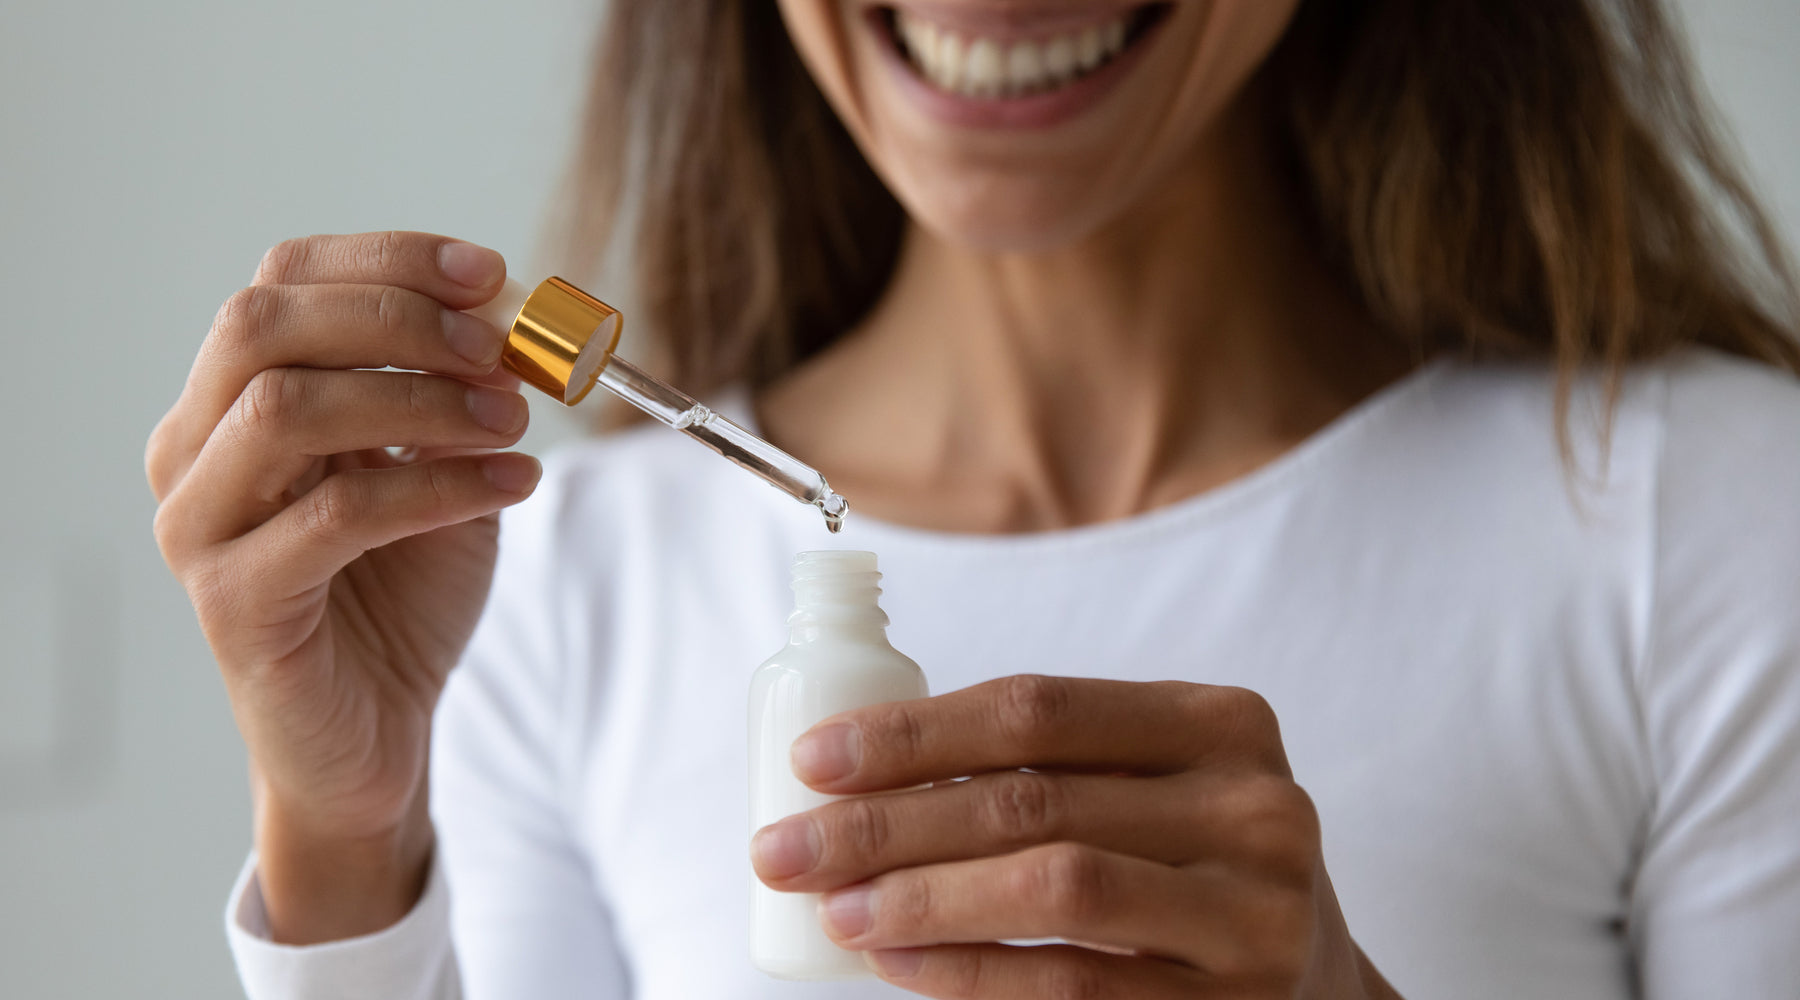 Woman taking face serum out of a bottle